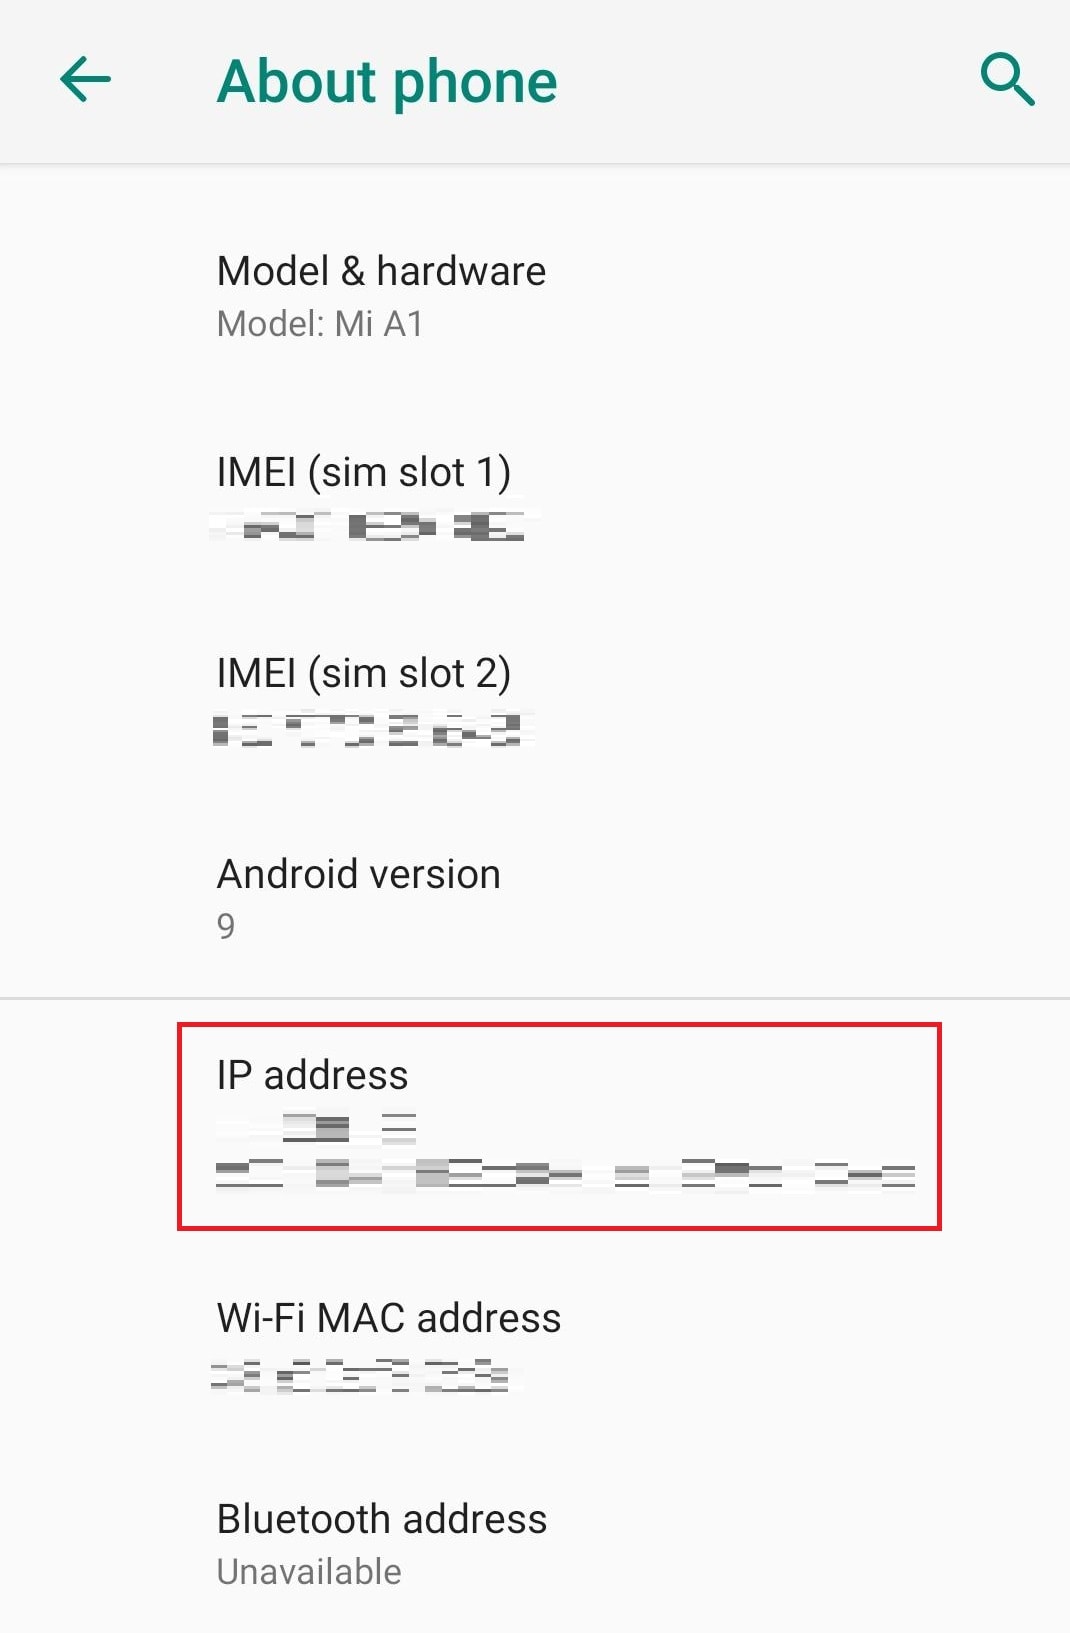 View the IP address next to the "IP address" heading